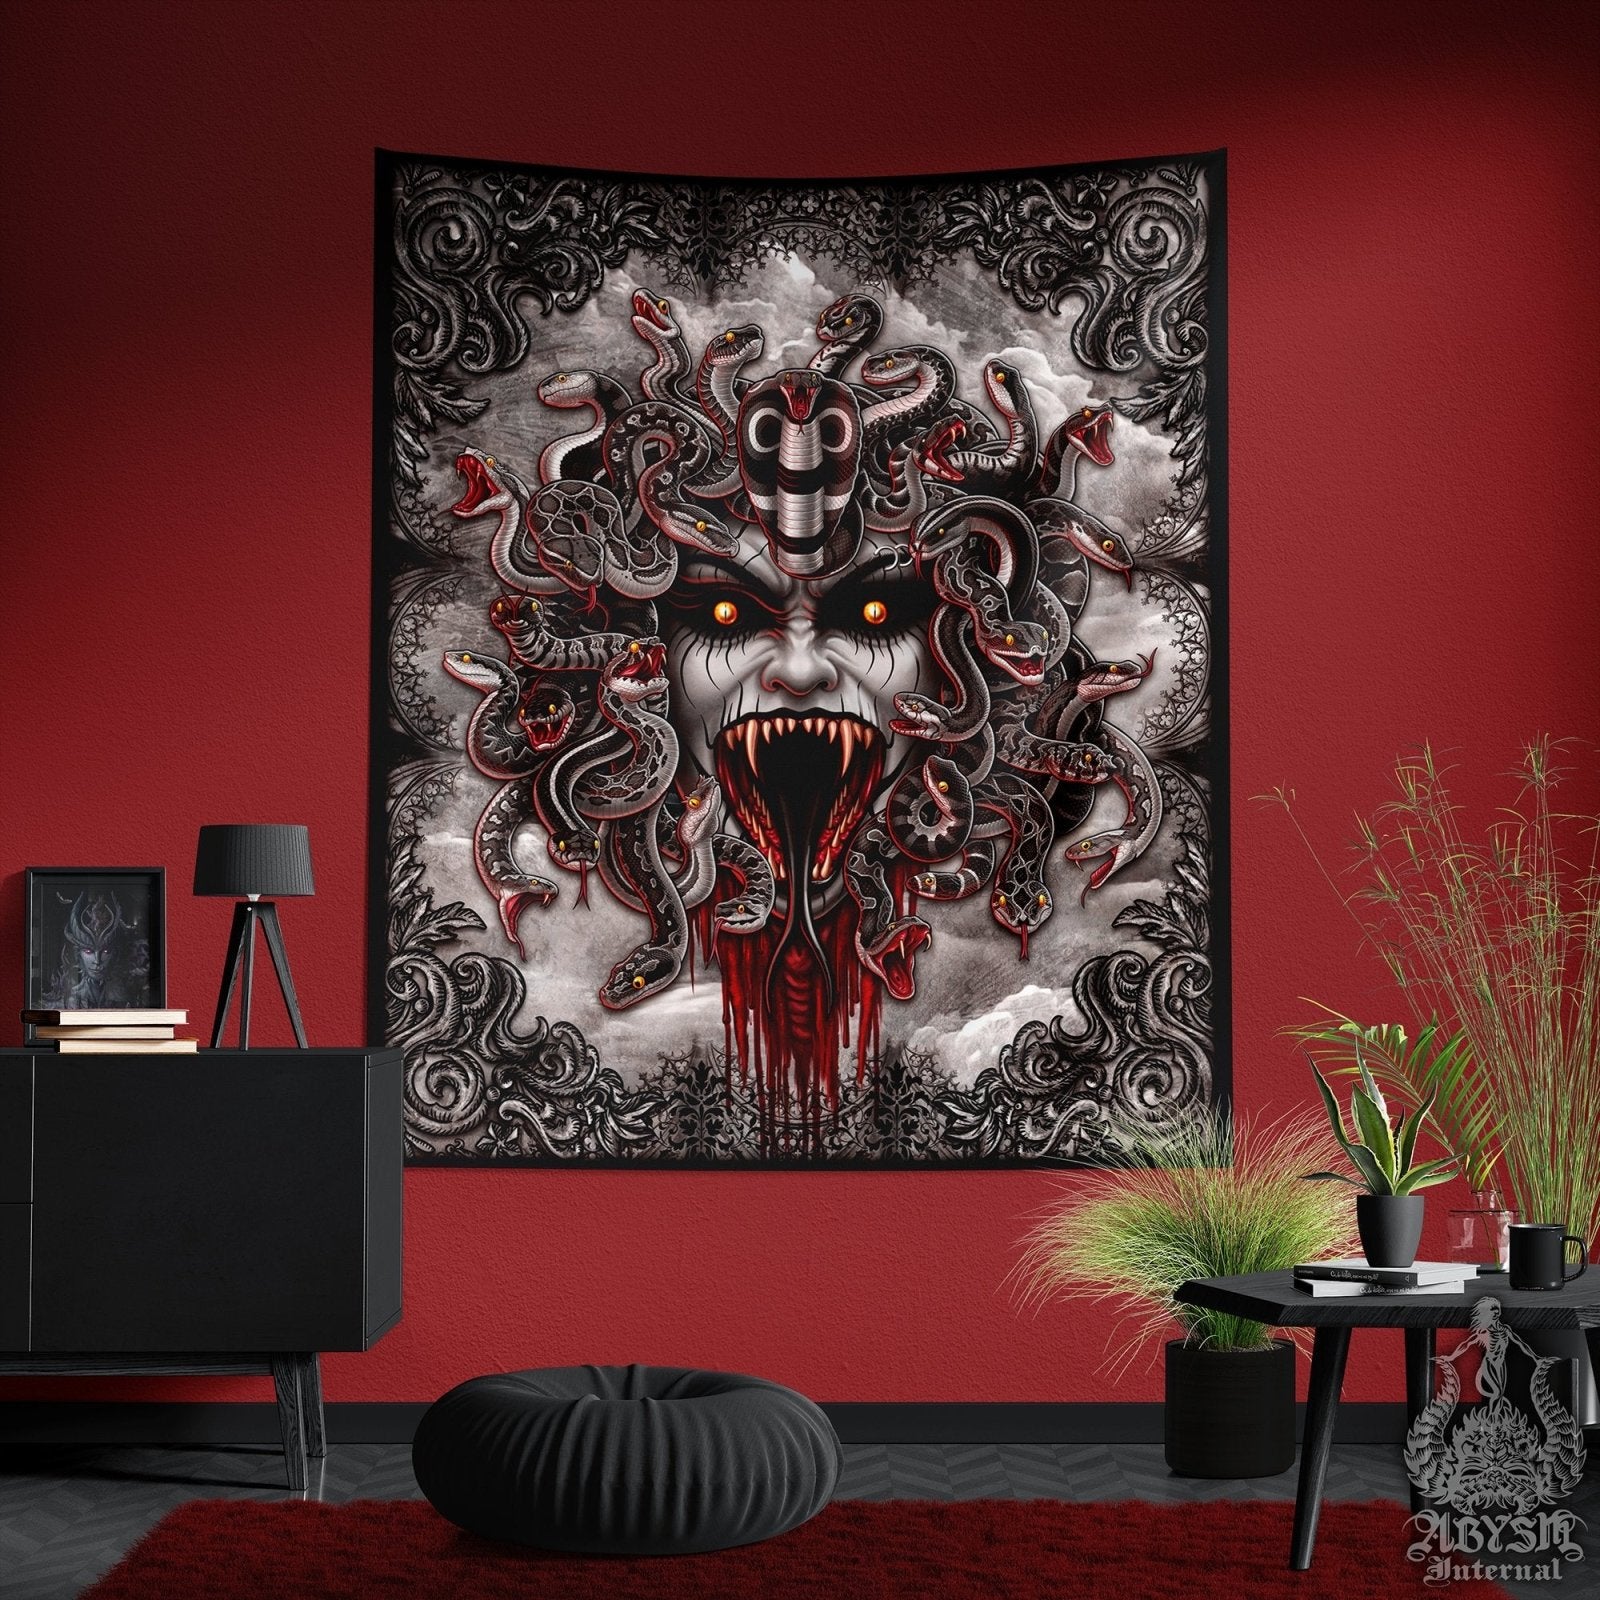 Gothic Tapestry, Medusa Wall Hanging, Goth Home Decor, Art Print - Horror Grey Snakes, 3 Faces - Abysm Internal